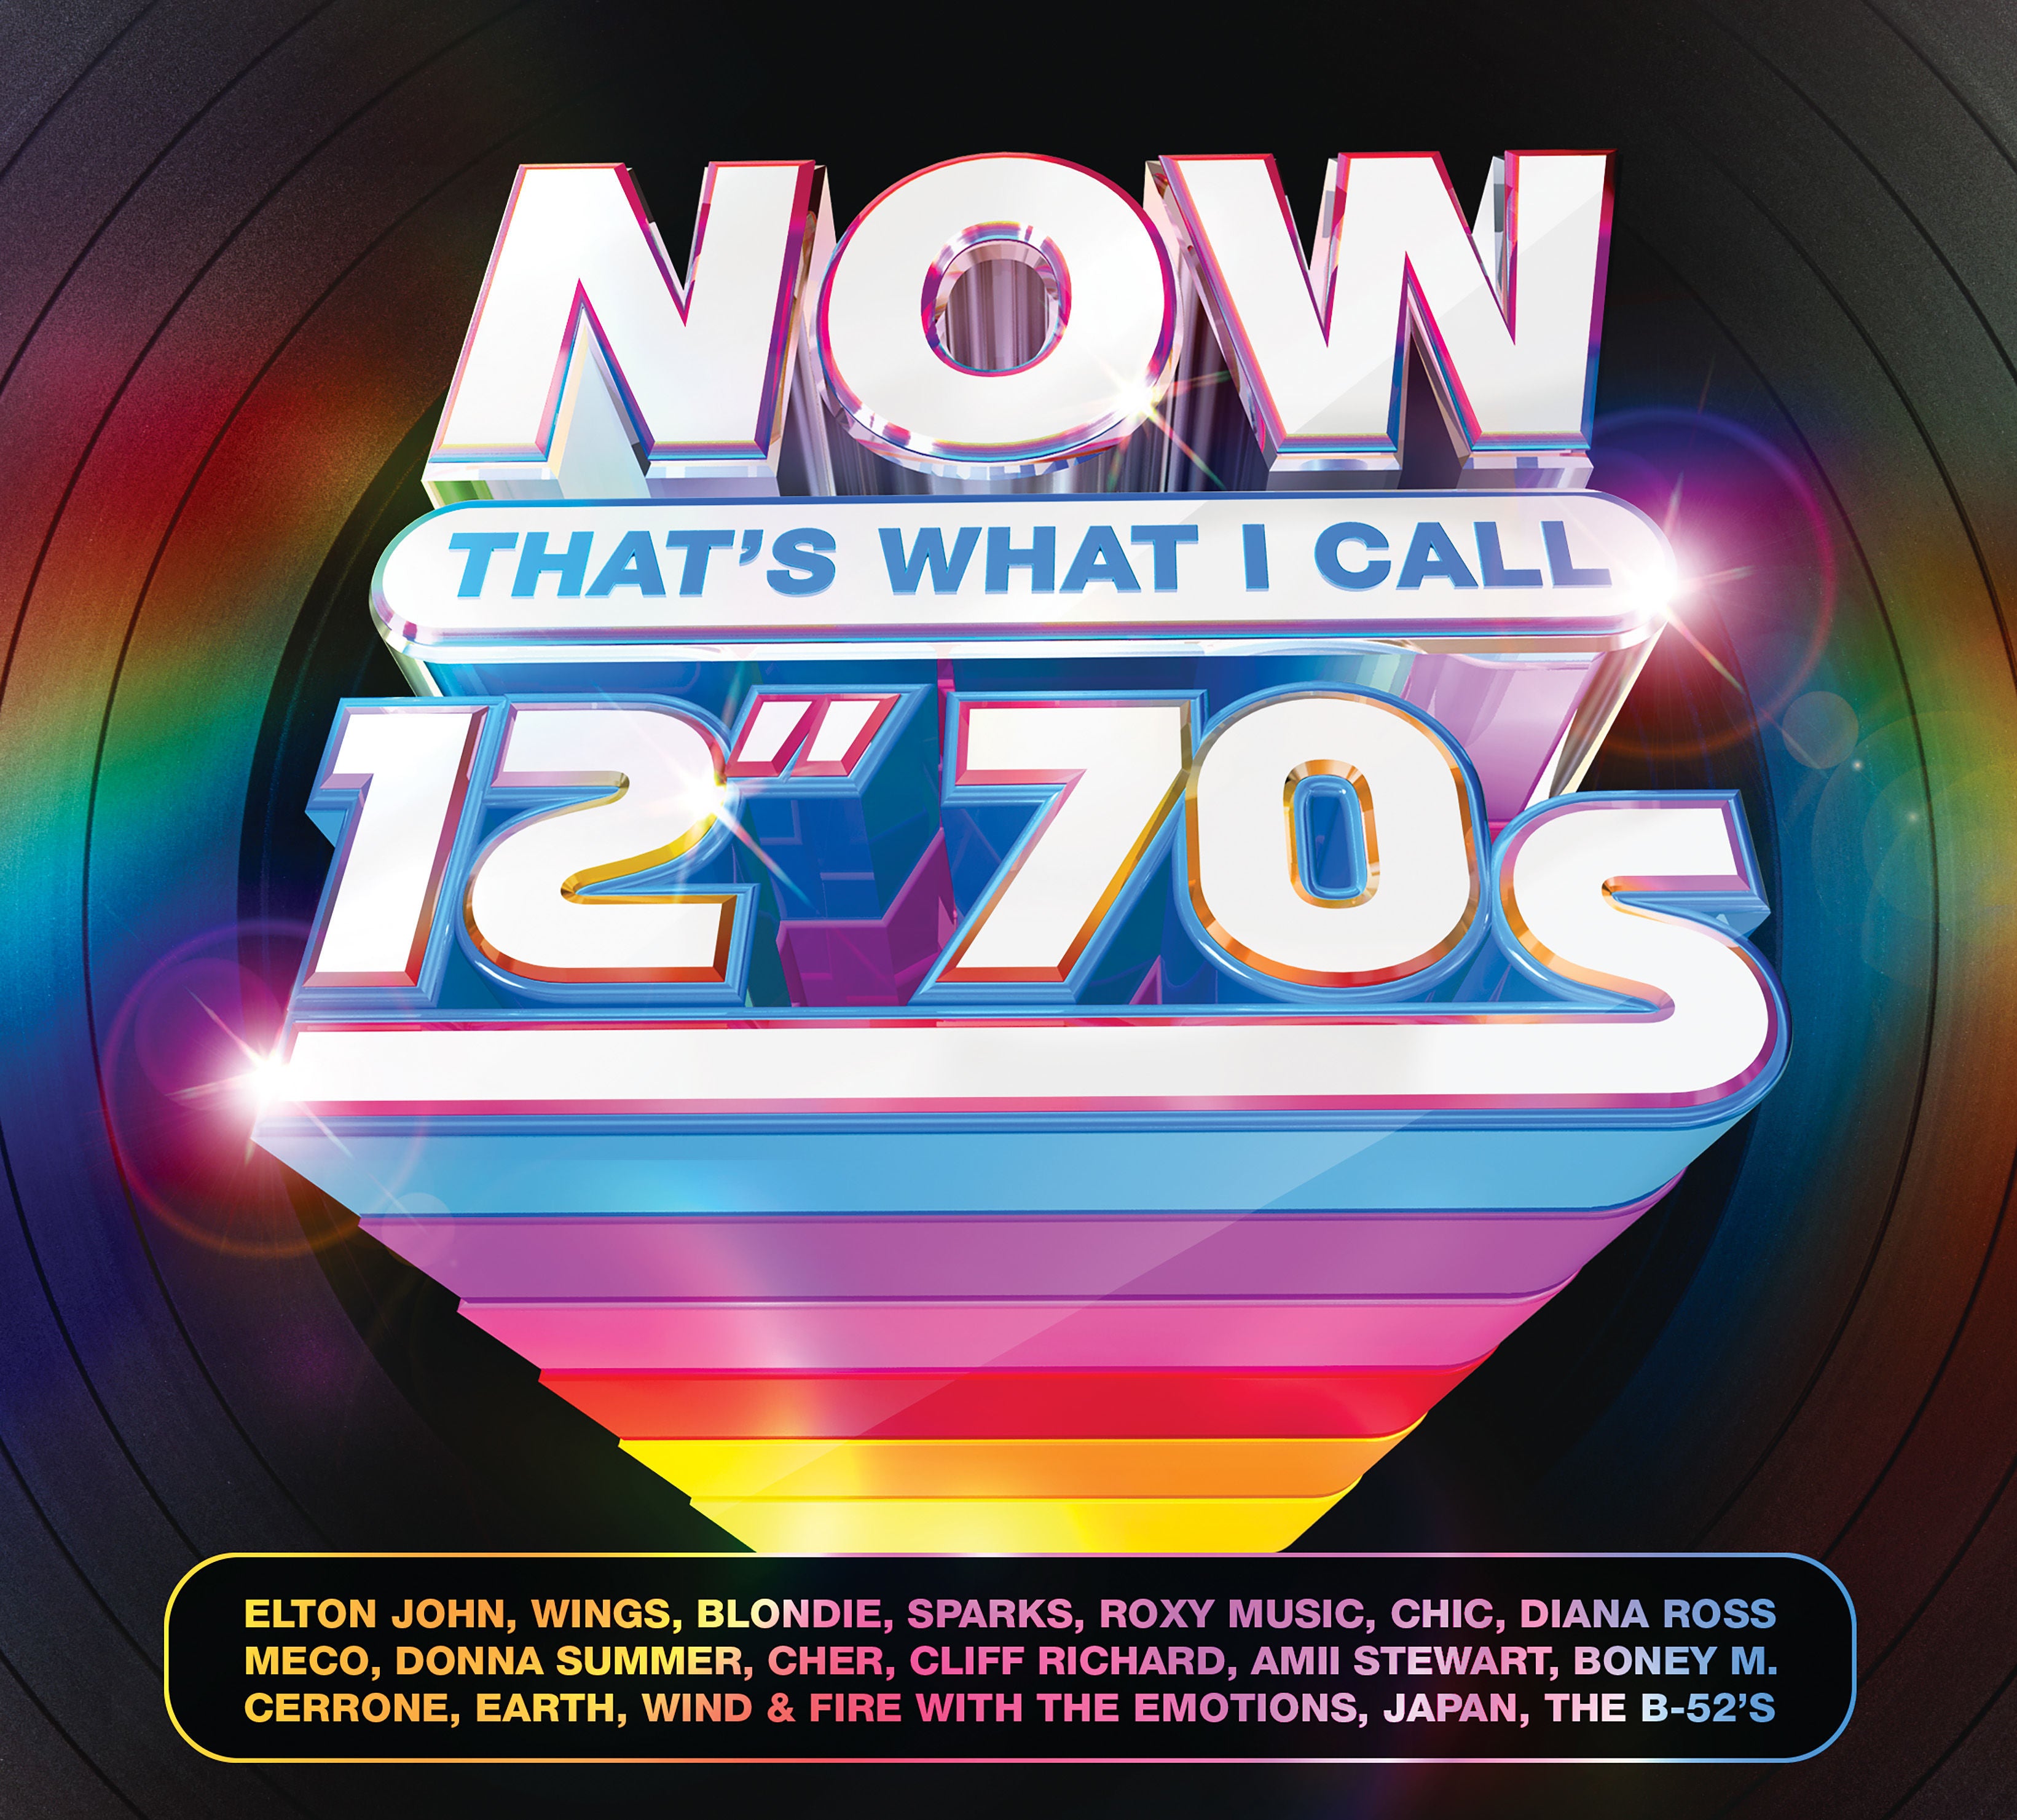 NOW That’s What I Call 12” 70s (4CD) - NOW MUSIC Official Store